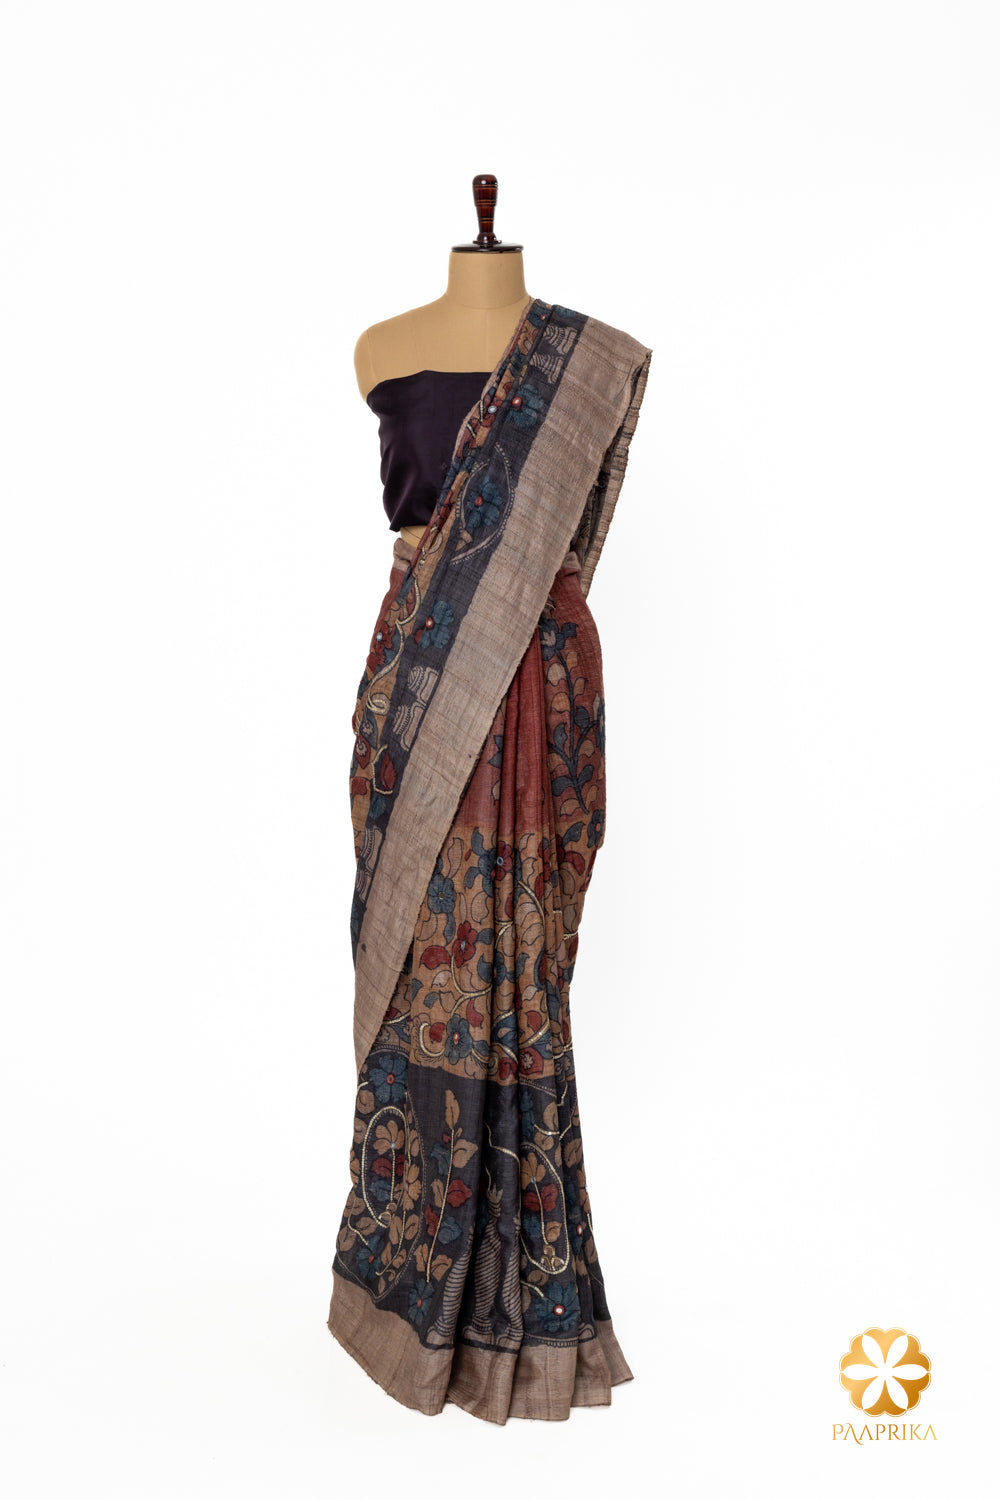 A full view of the Tussar Silk Saree, draped elegantly, to capture its overall design and craftsmanship.